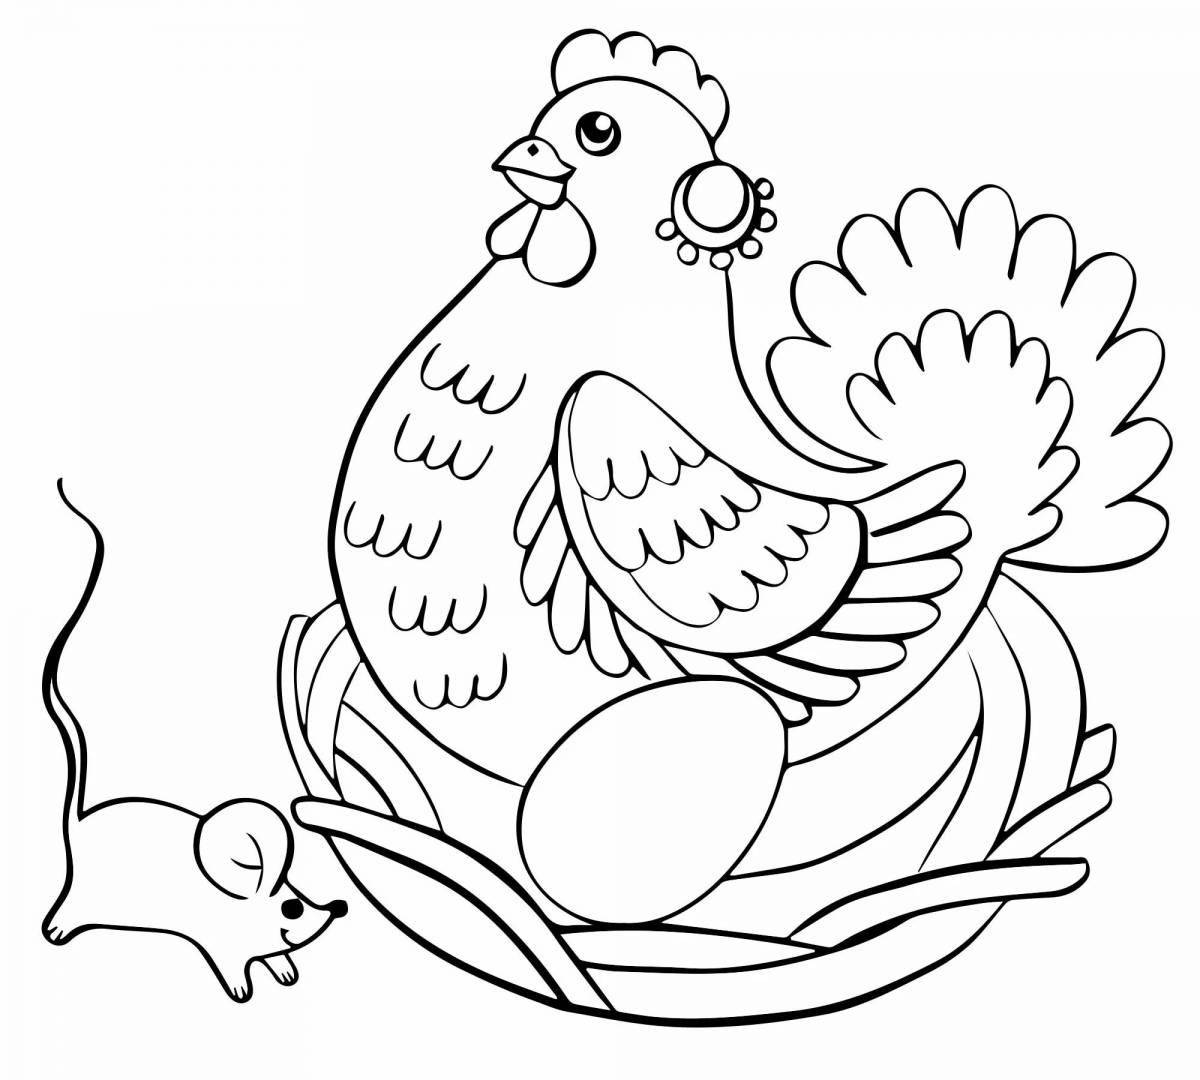 Cute chicken pockmarked coloring book for kids